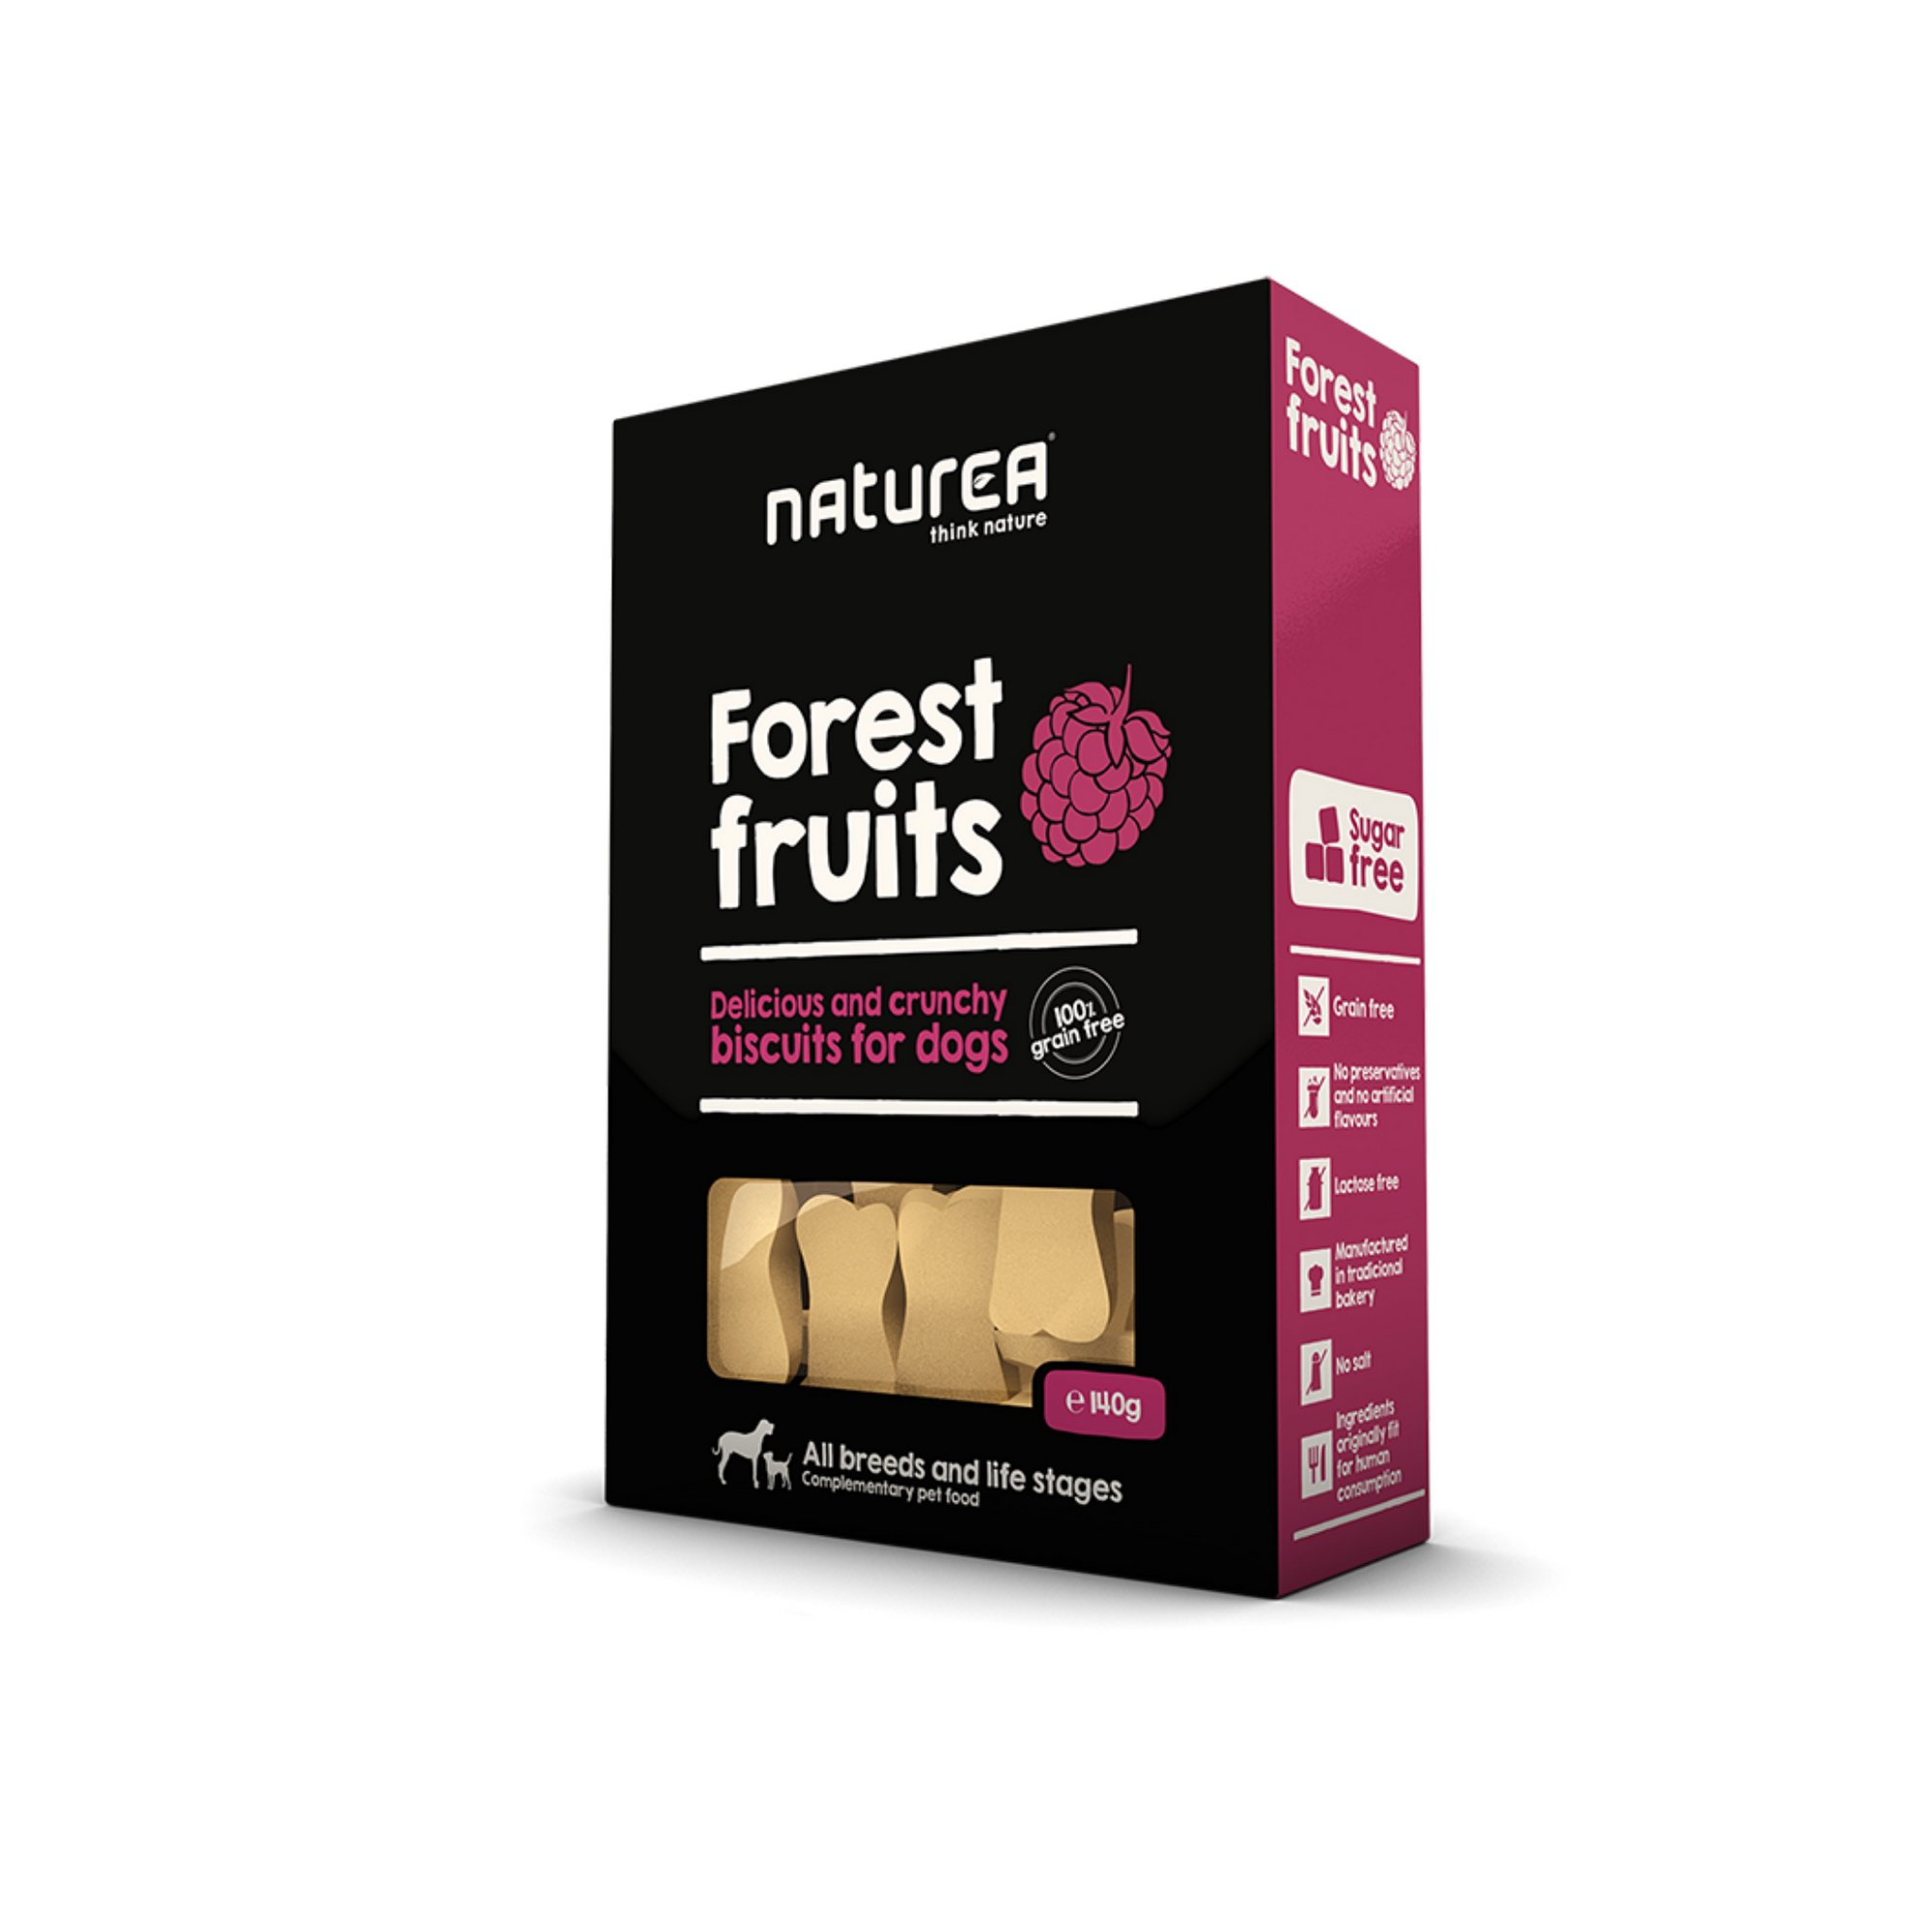 Delicious biscuits for dogs with the taste of wild berries